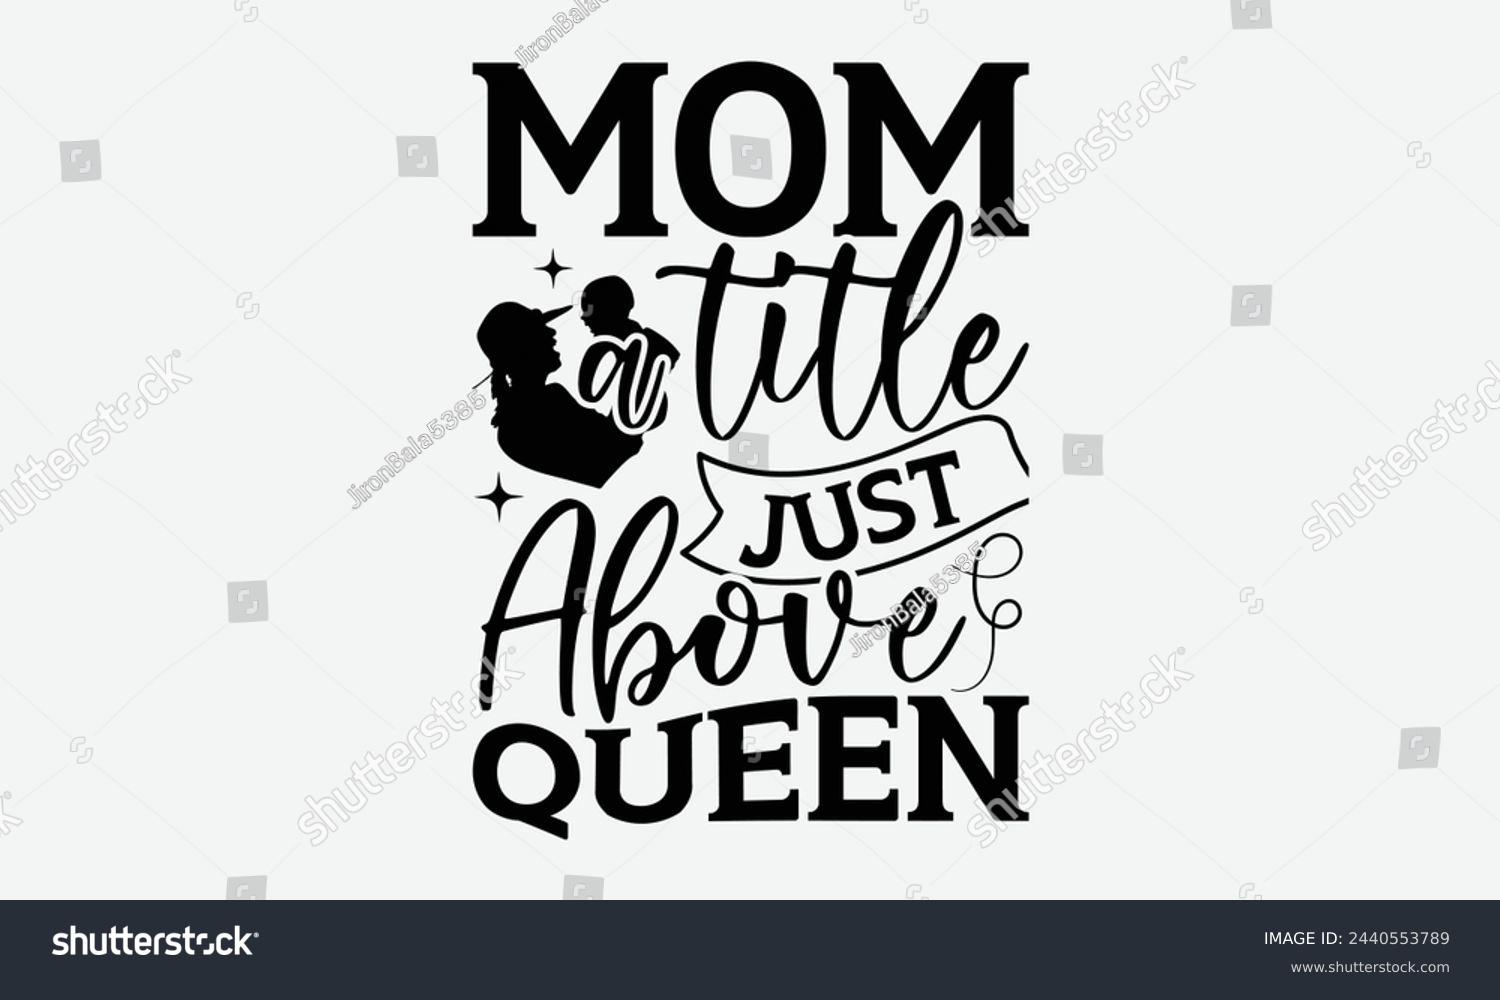 SVG of Mom a title just above queen - Mom t-shirt design, isolated on white background, this illustration can be used as a print on t-shirts and bags, cover book, template, stationary or as a poster. svg